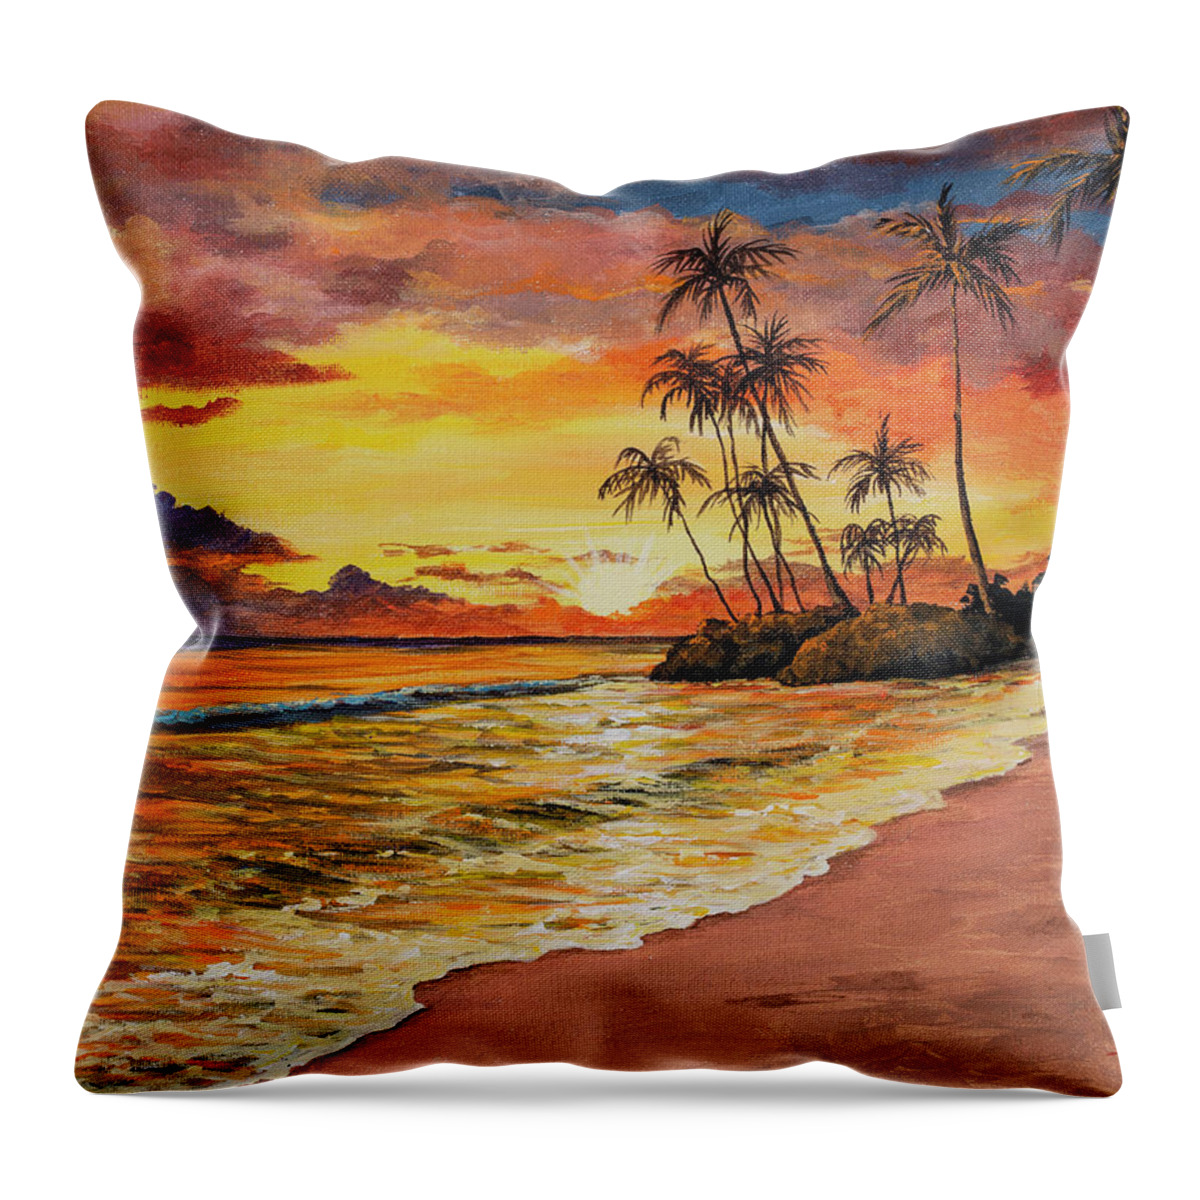 Sunset Throw Pillow featuring the painting Sunset And Palms by Darice Machel McGuire